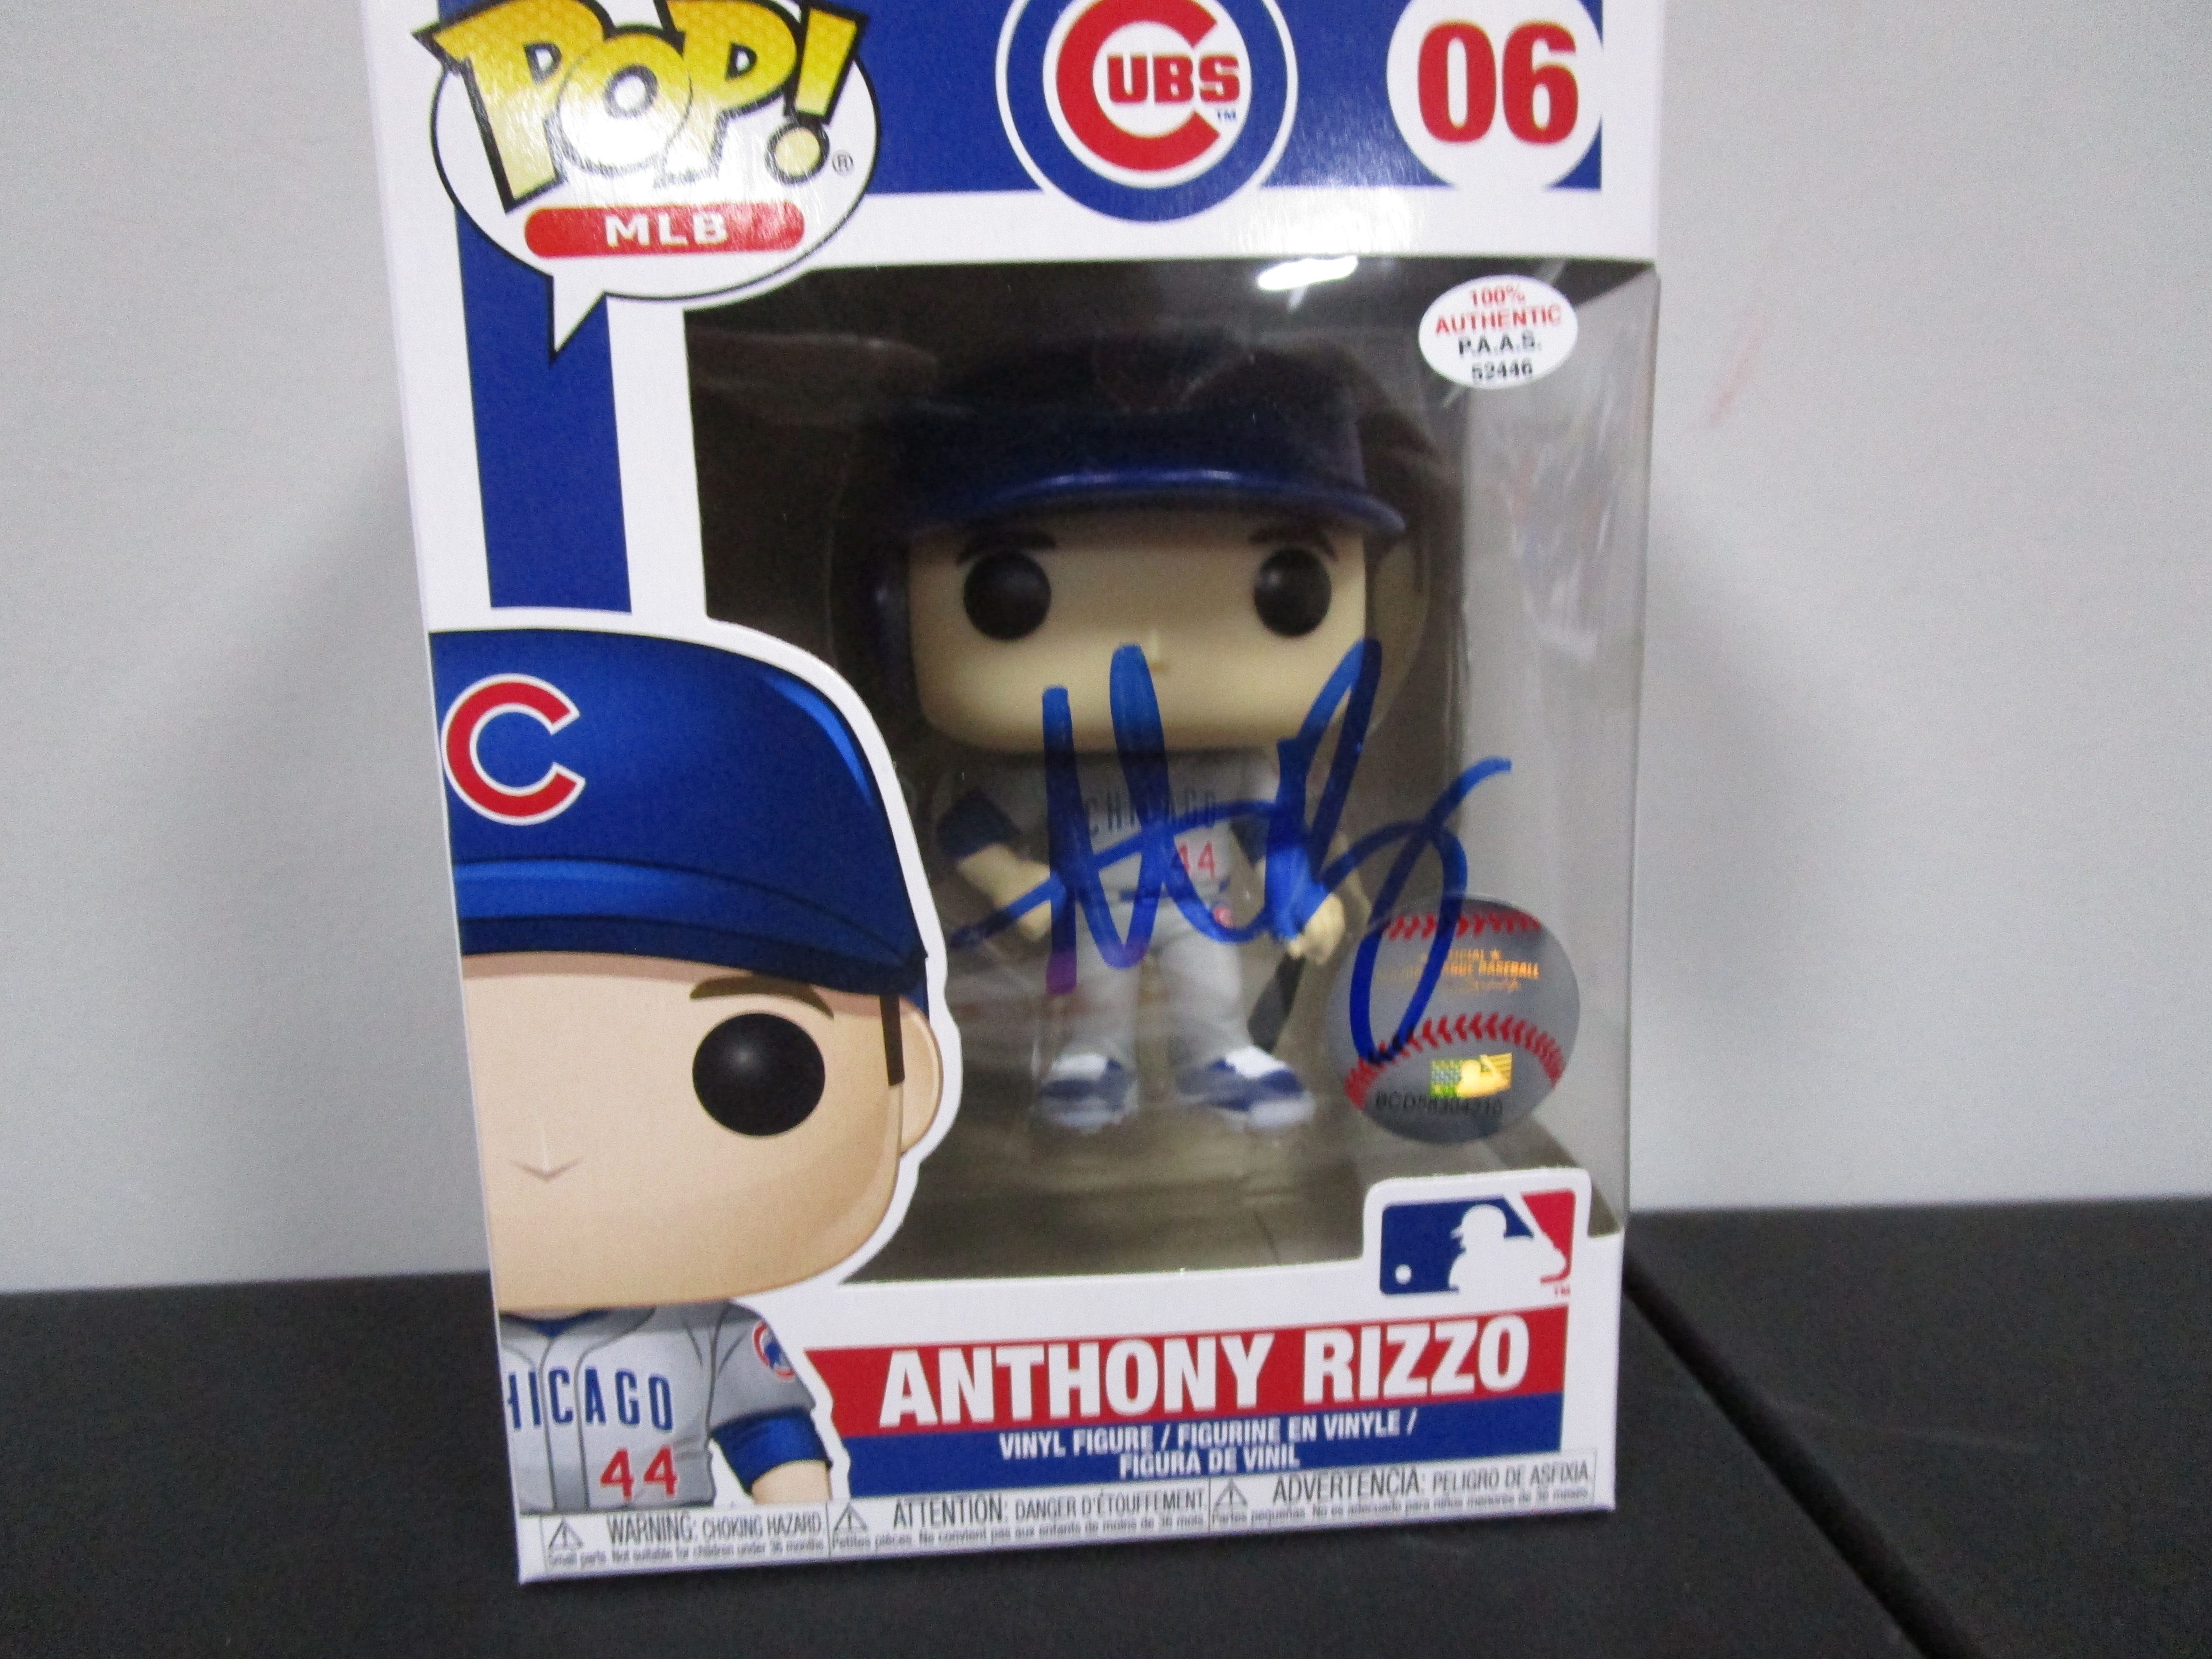 Anthony Rizzo Memorabilia, Anthony Rizzo Collectibles, Verified Signed  Anthony Rizzo Photos